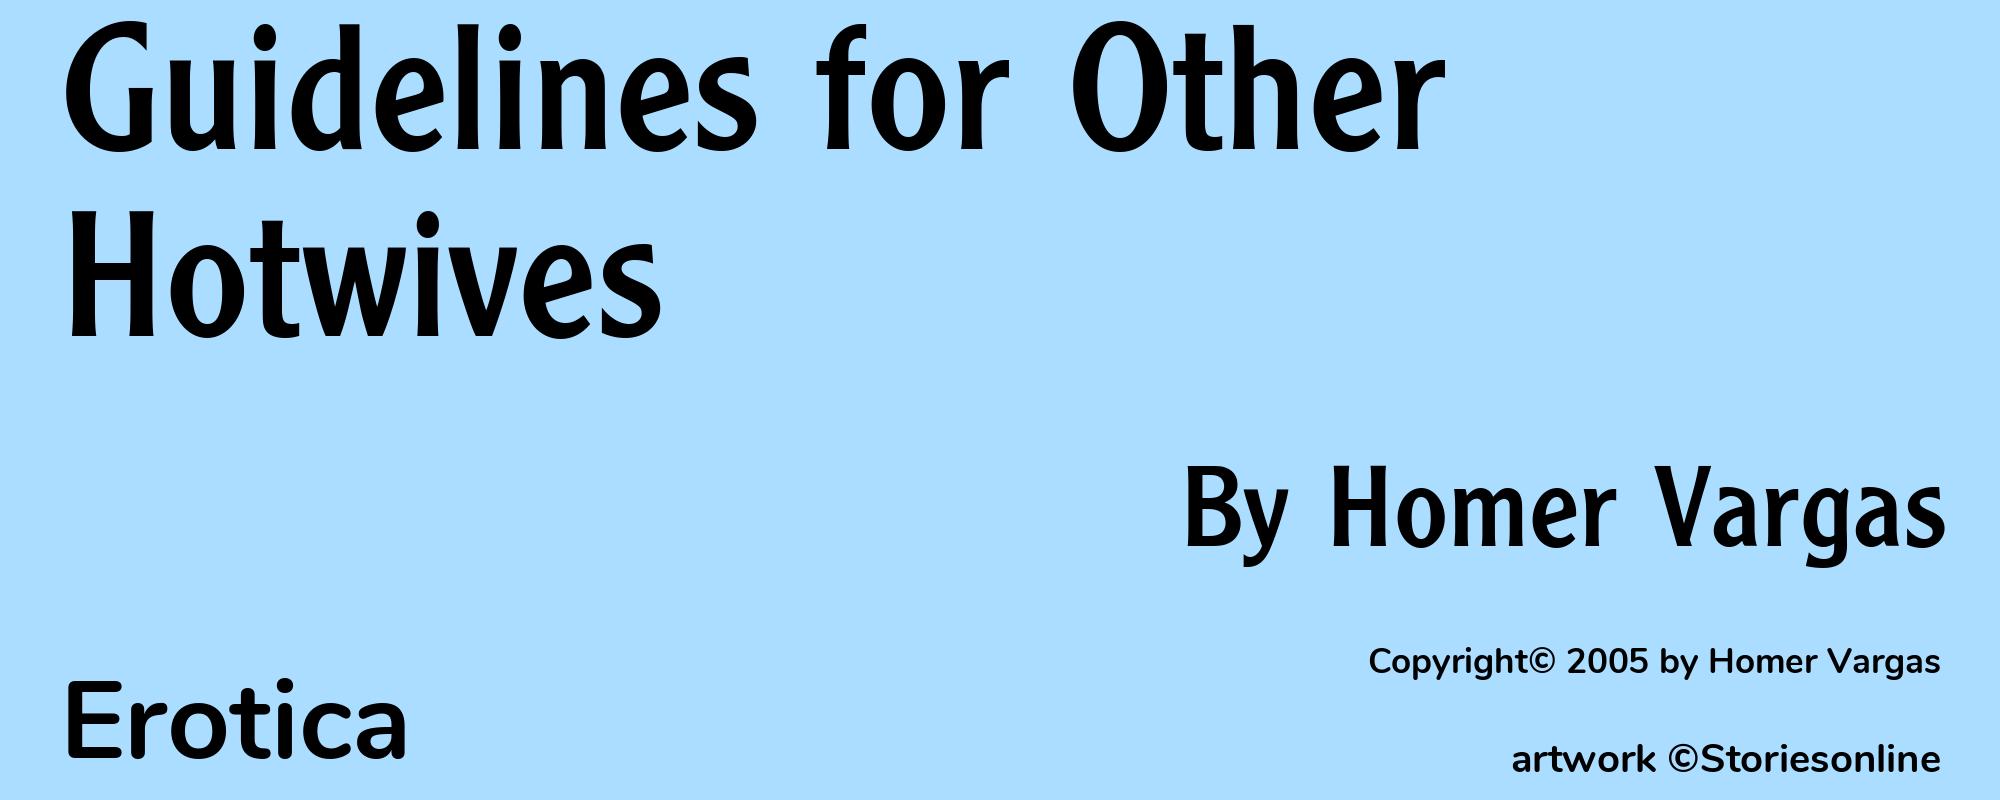 Guidelines for Other Hotwives - Cover